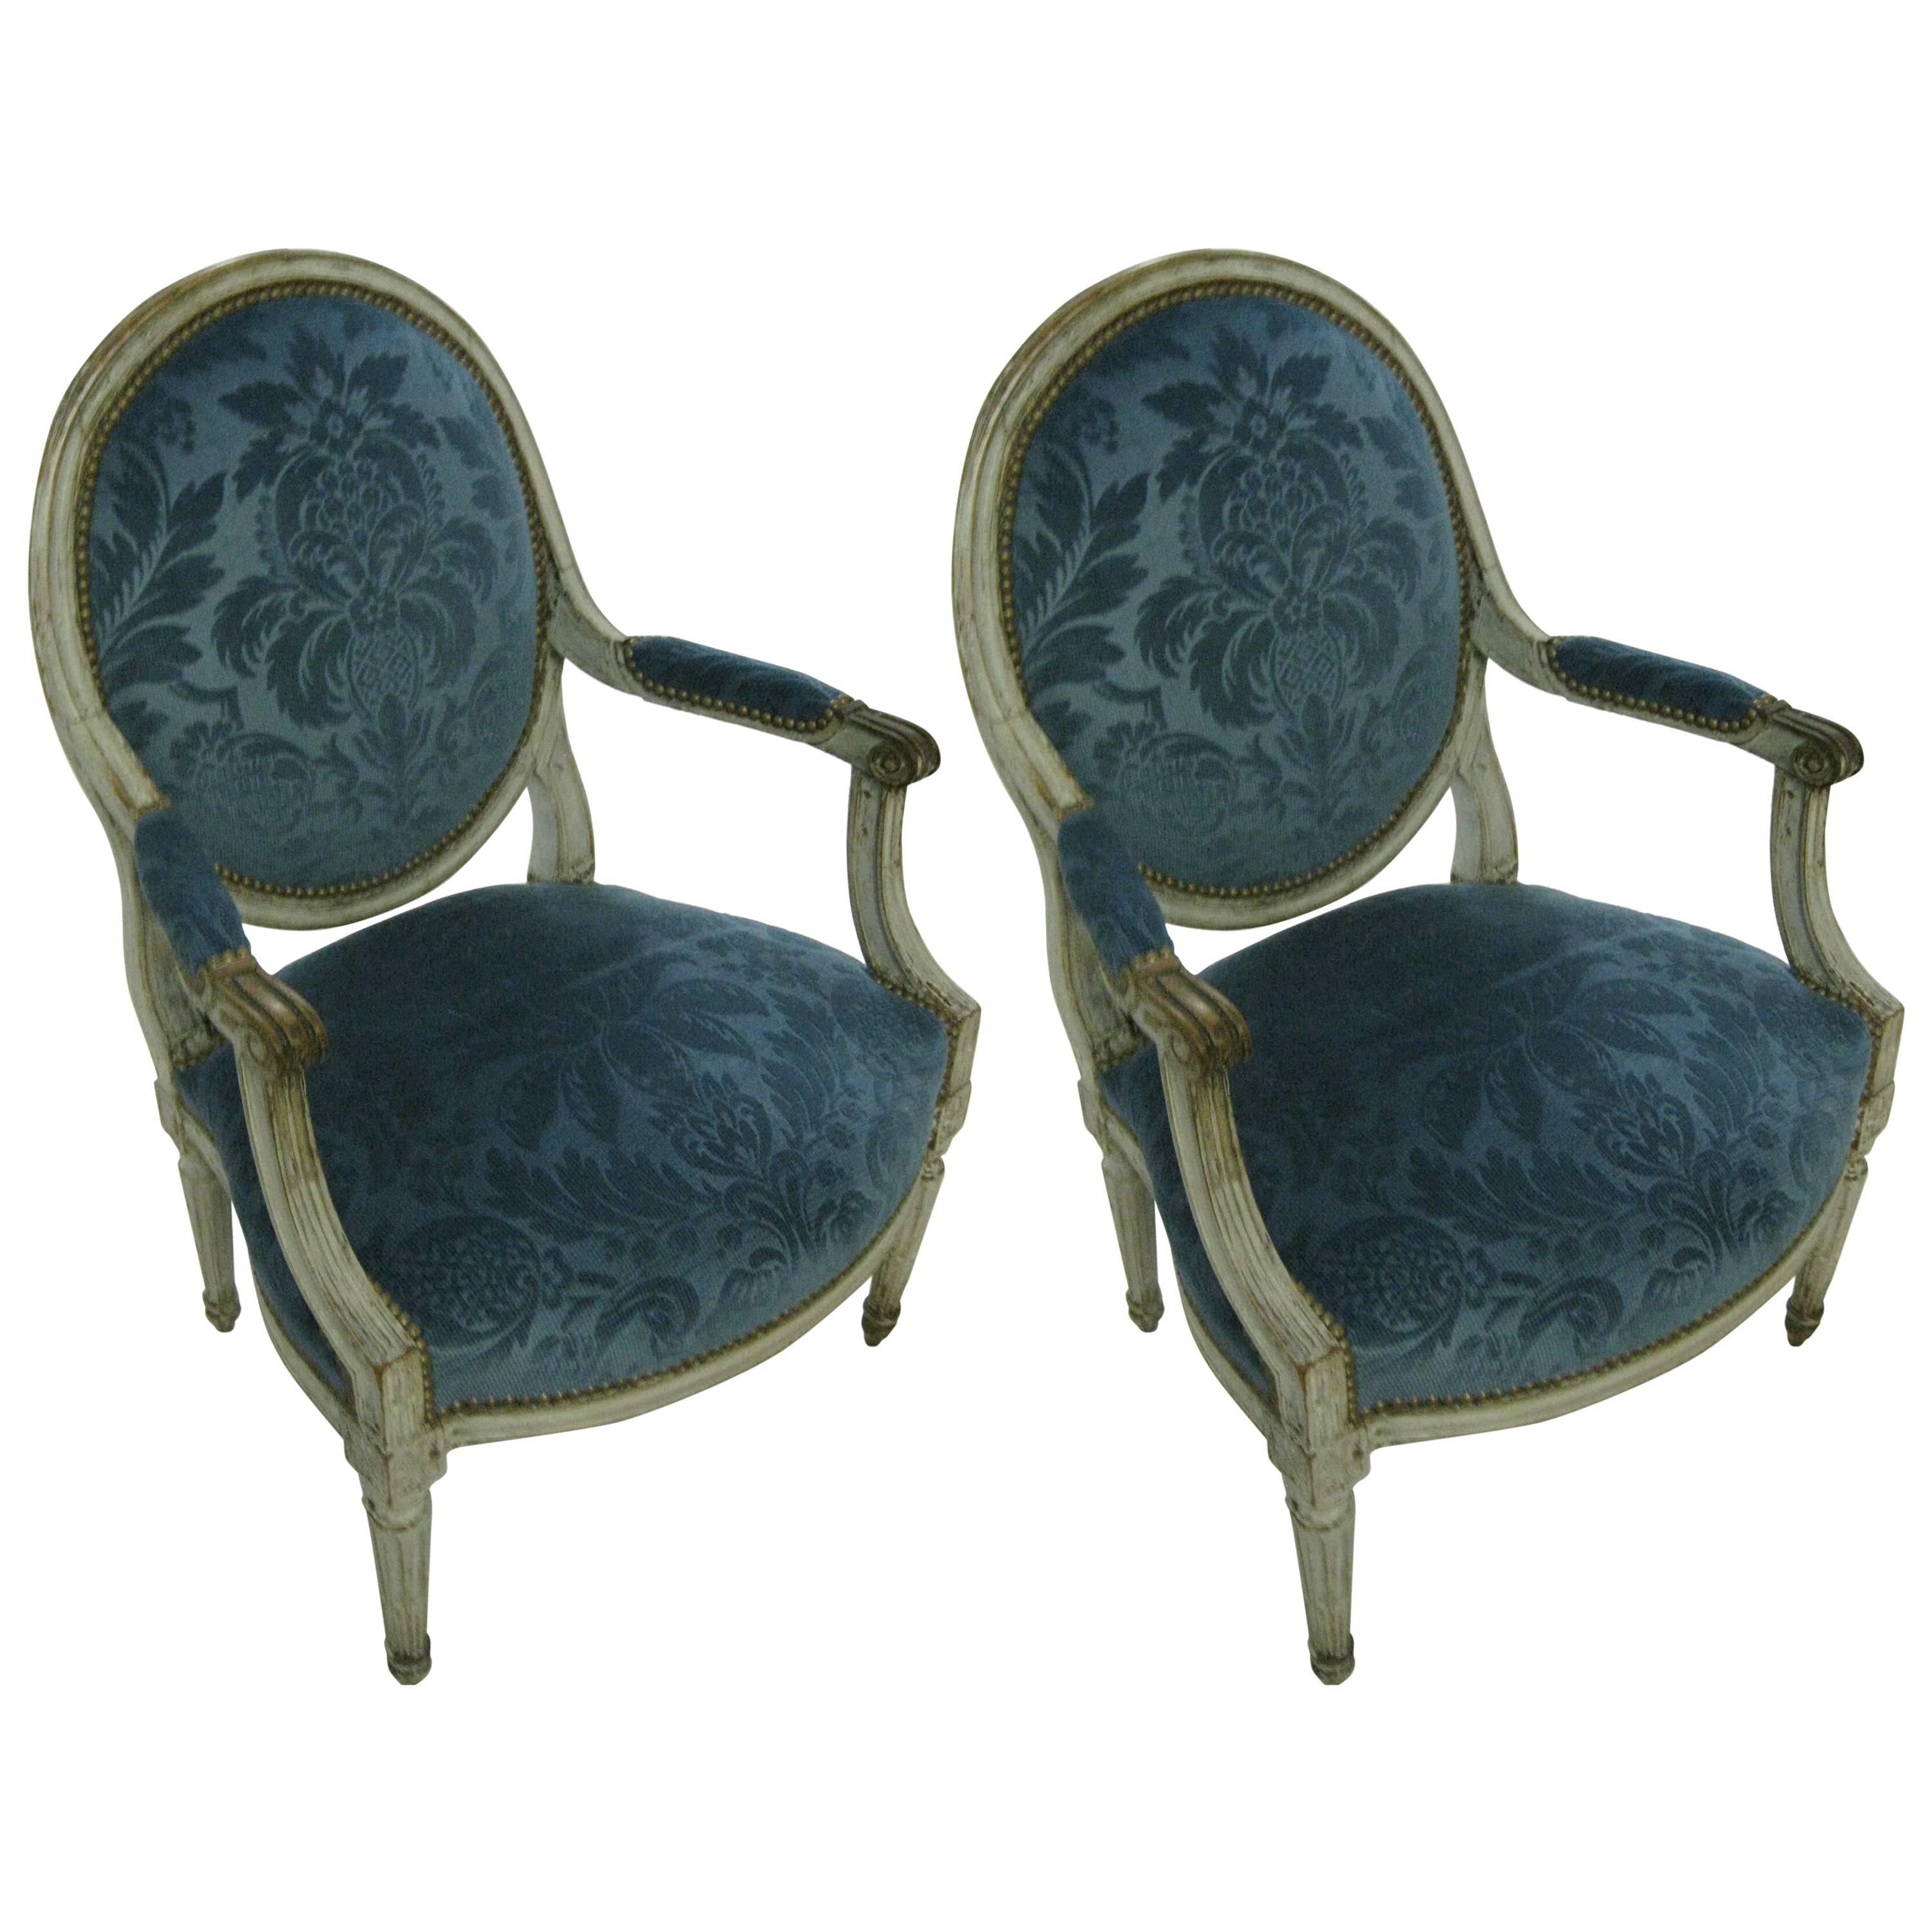 Pair of French Fauteuil, 18th Century